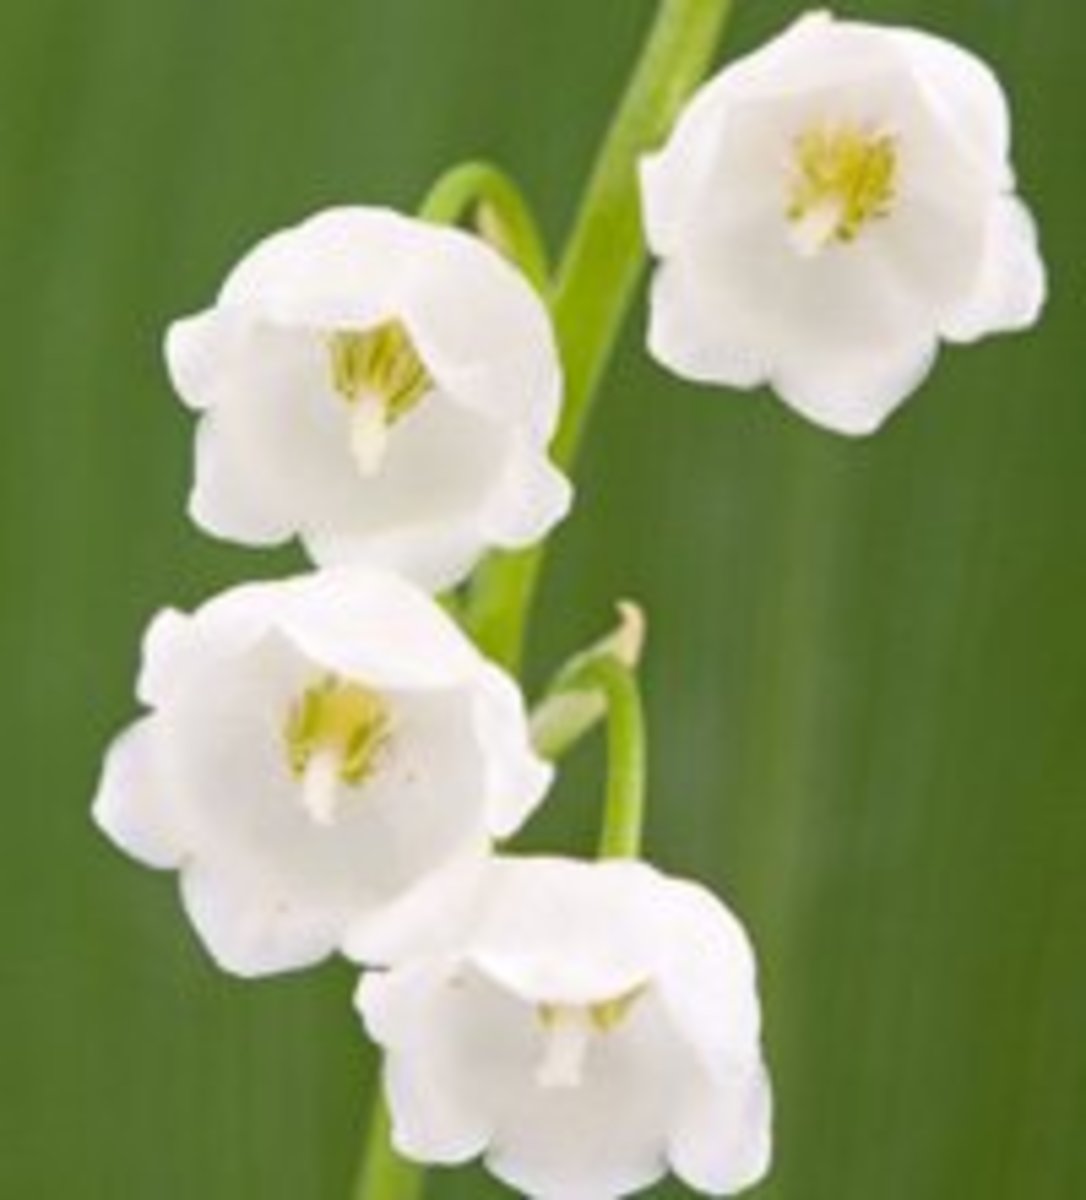 Lily-of-the-valley is a popular wedding flower